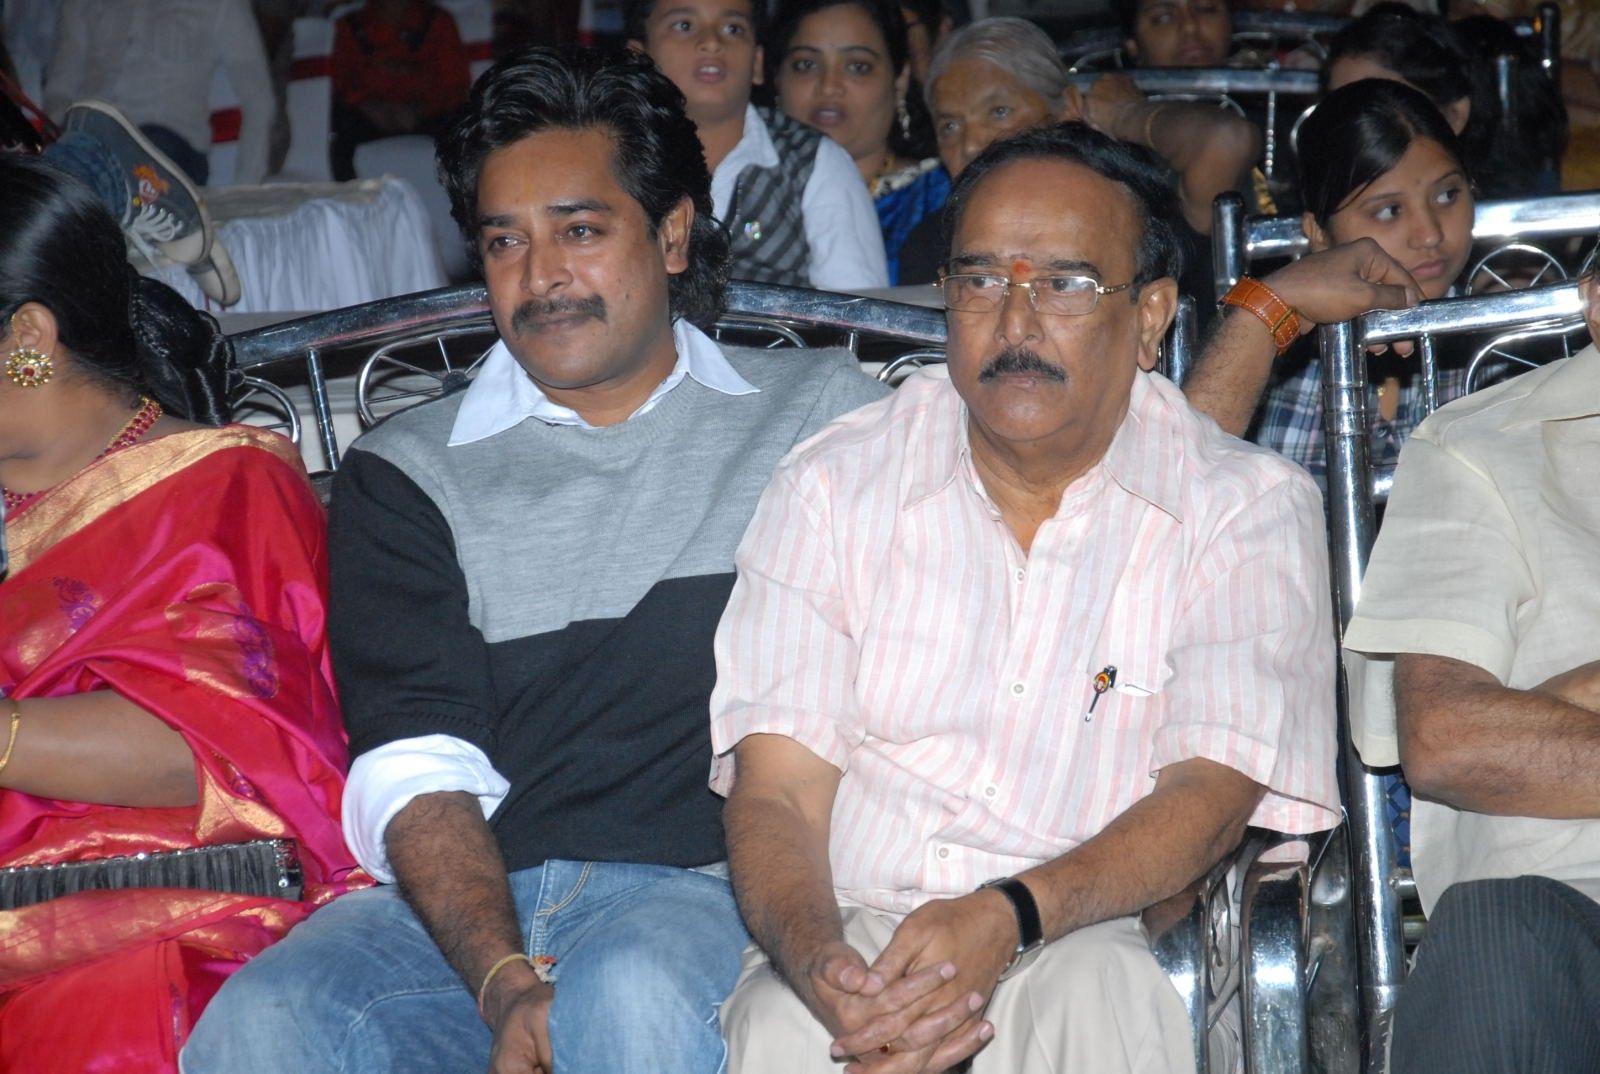 Rey Rey Movie Audio Launch Pictures | Picture 365849